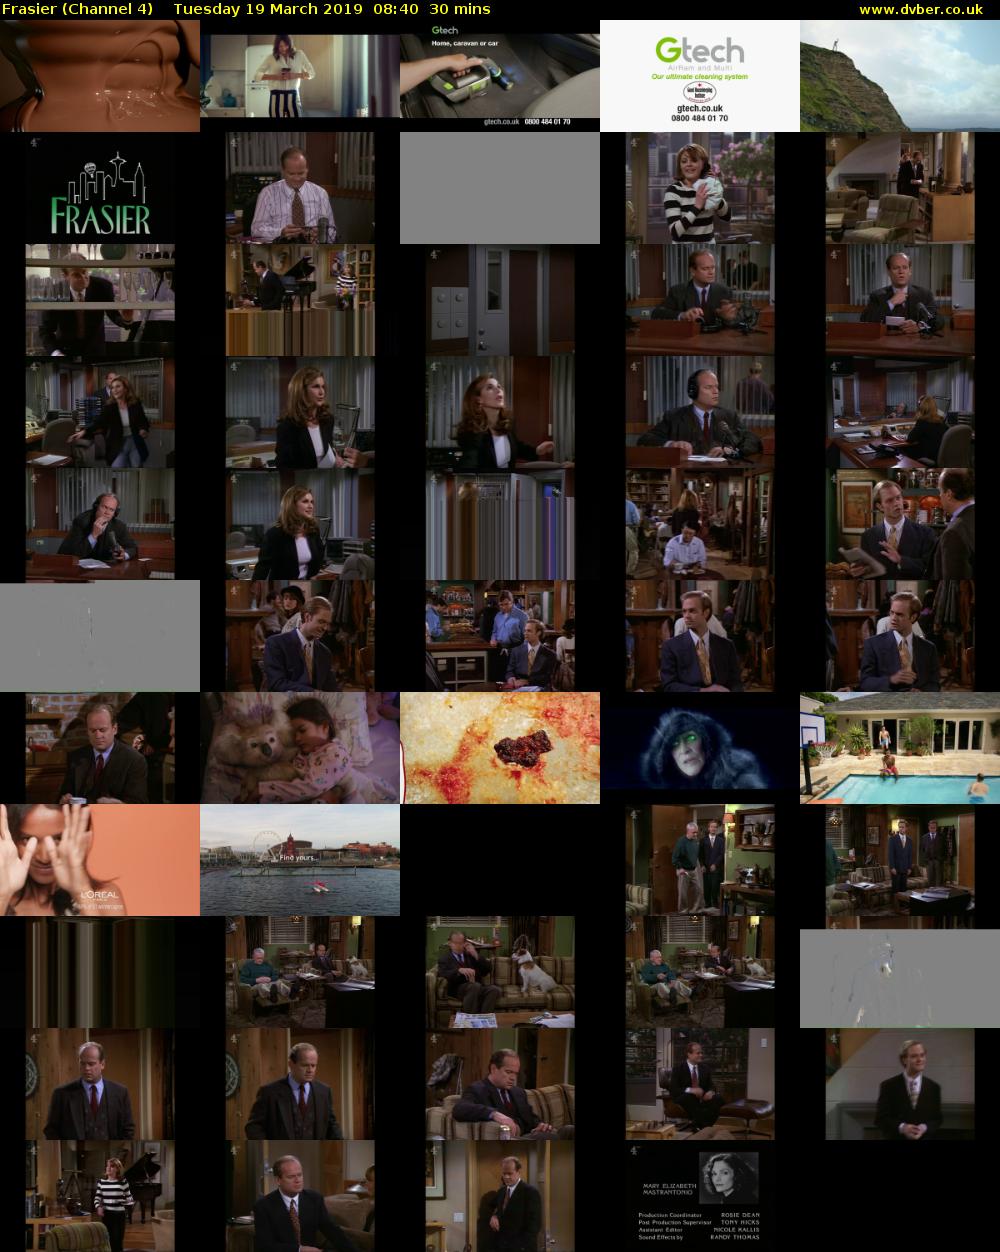 Frasier (Channel 4) Tuesday 19 March 2019 08:40 - 09:10